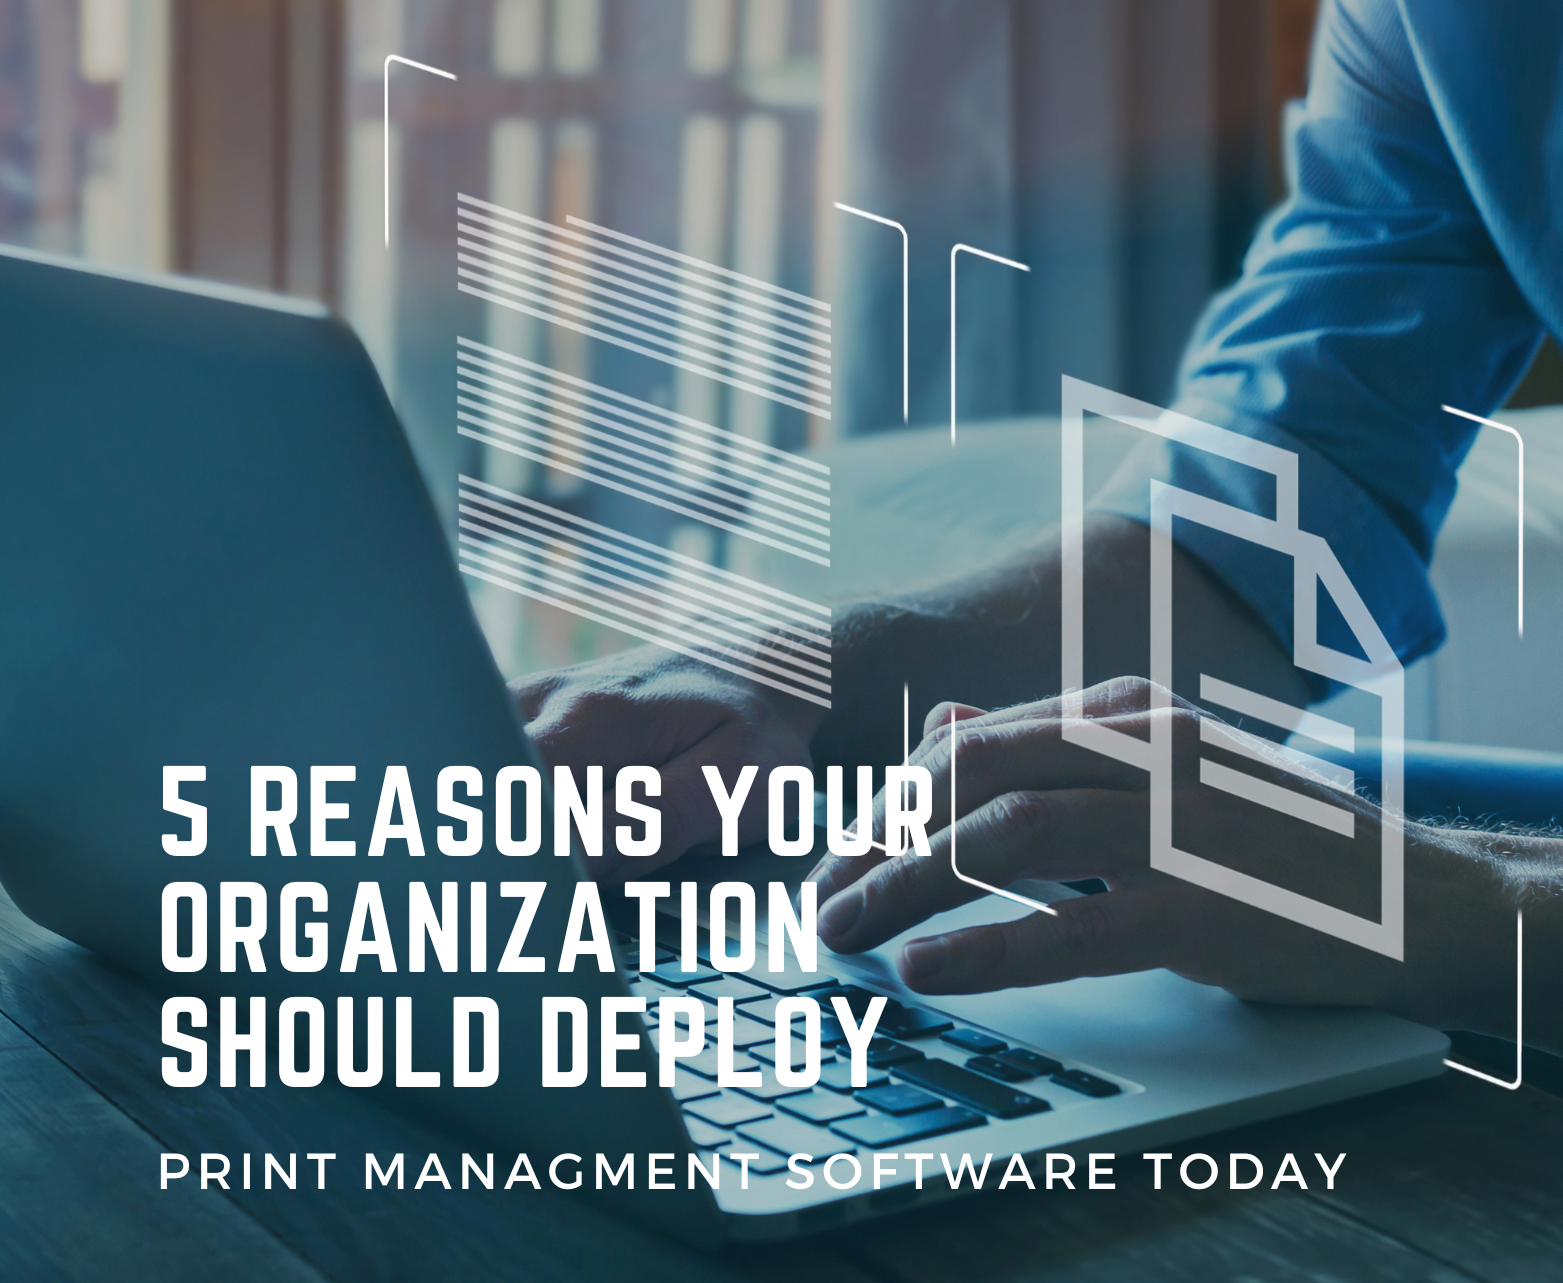 5 Reasons Your Organization Should Deploy Print Management Software